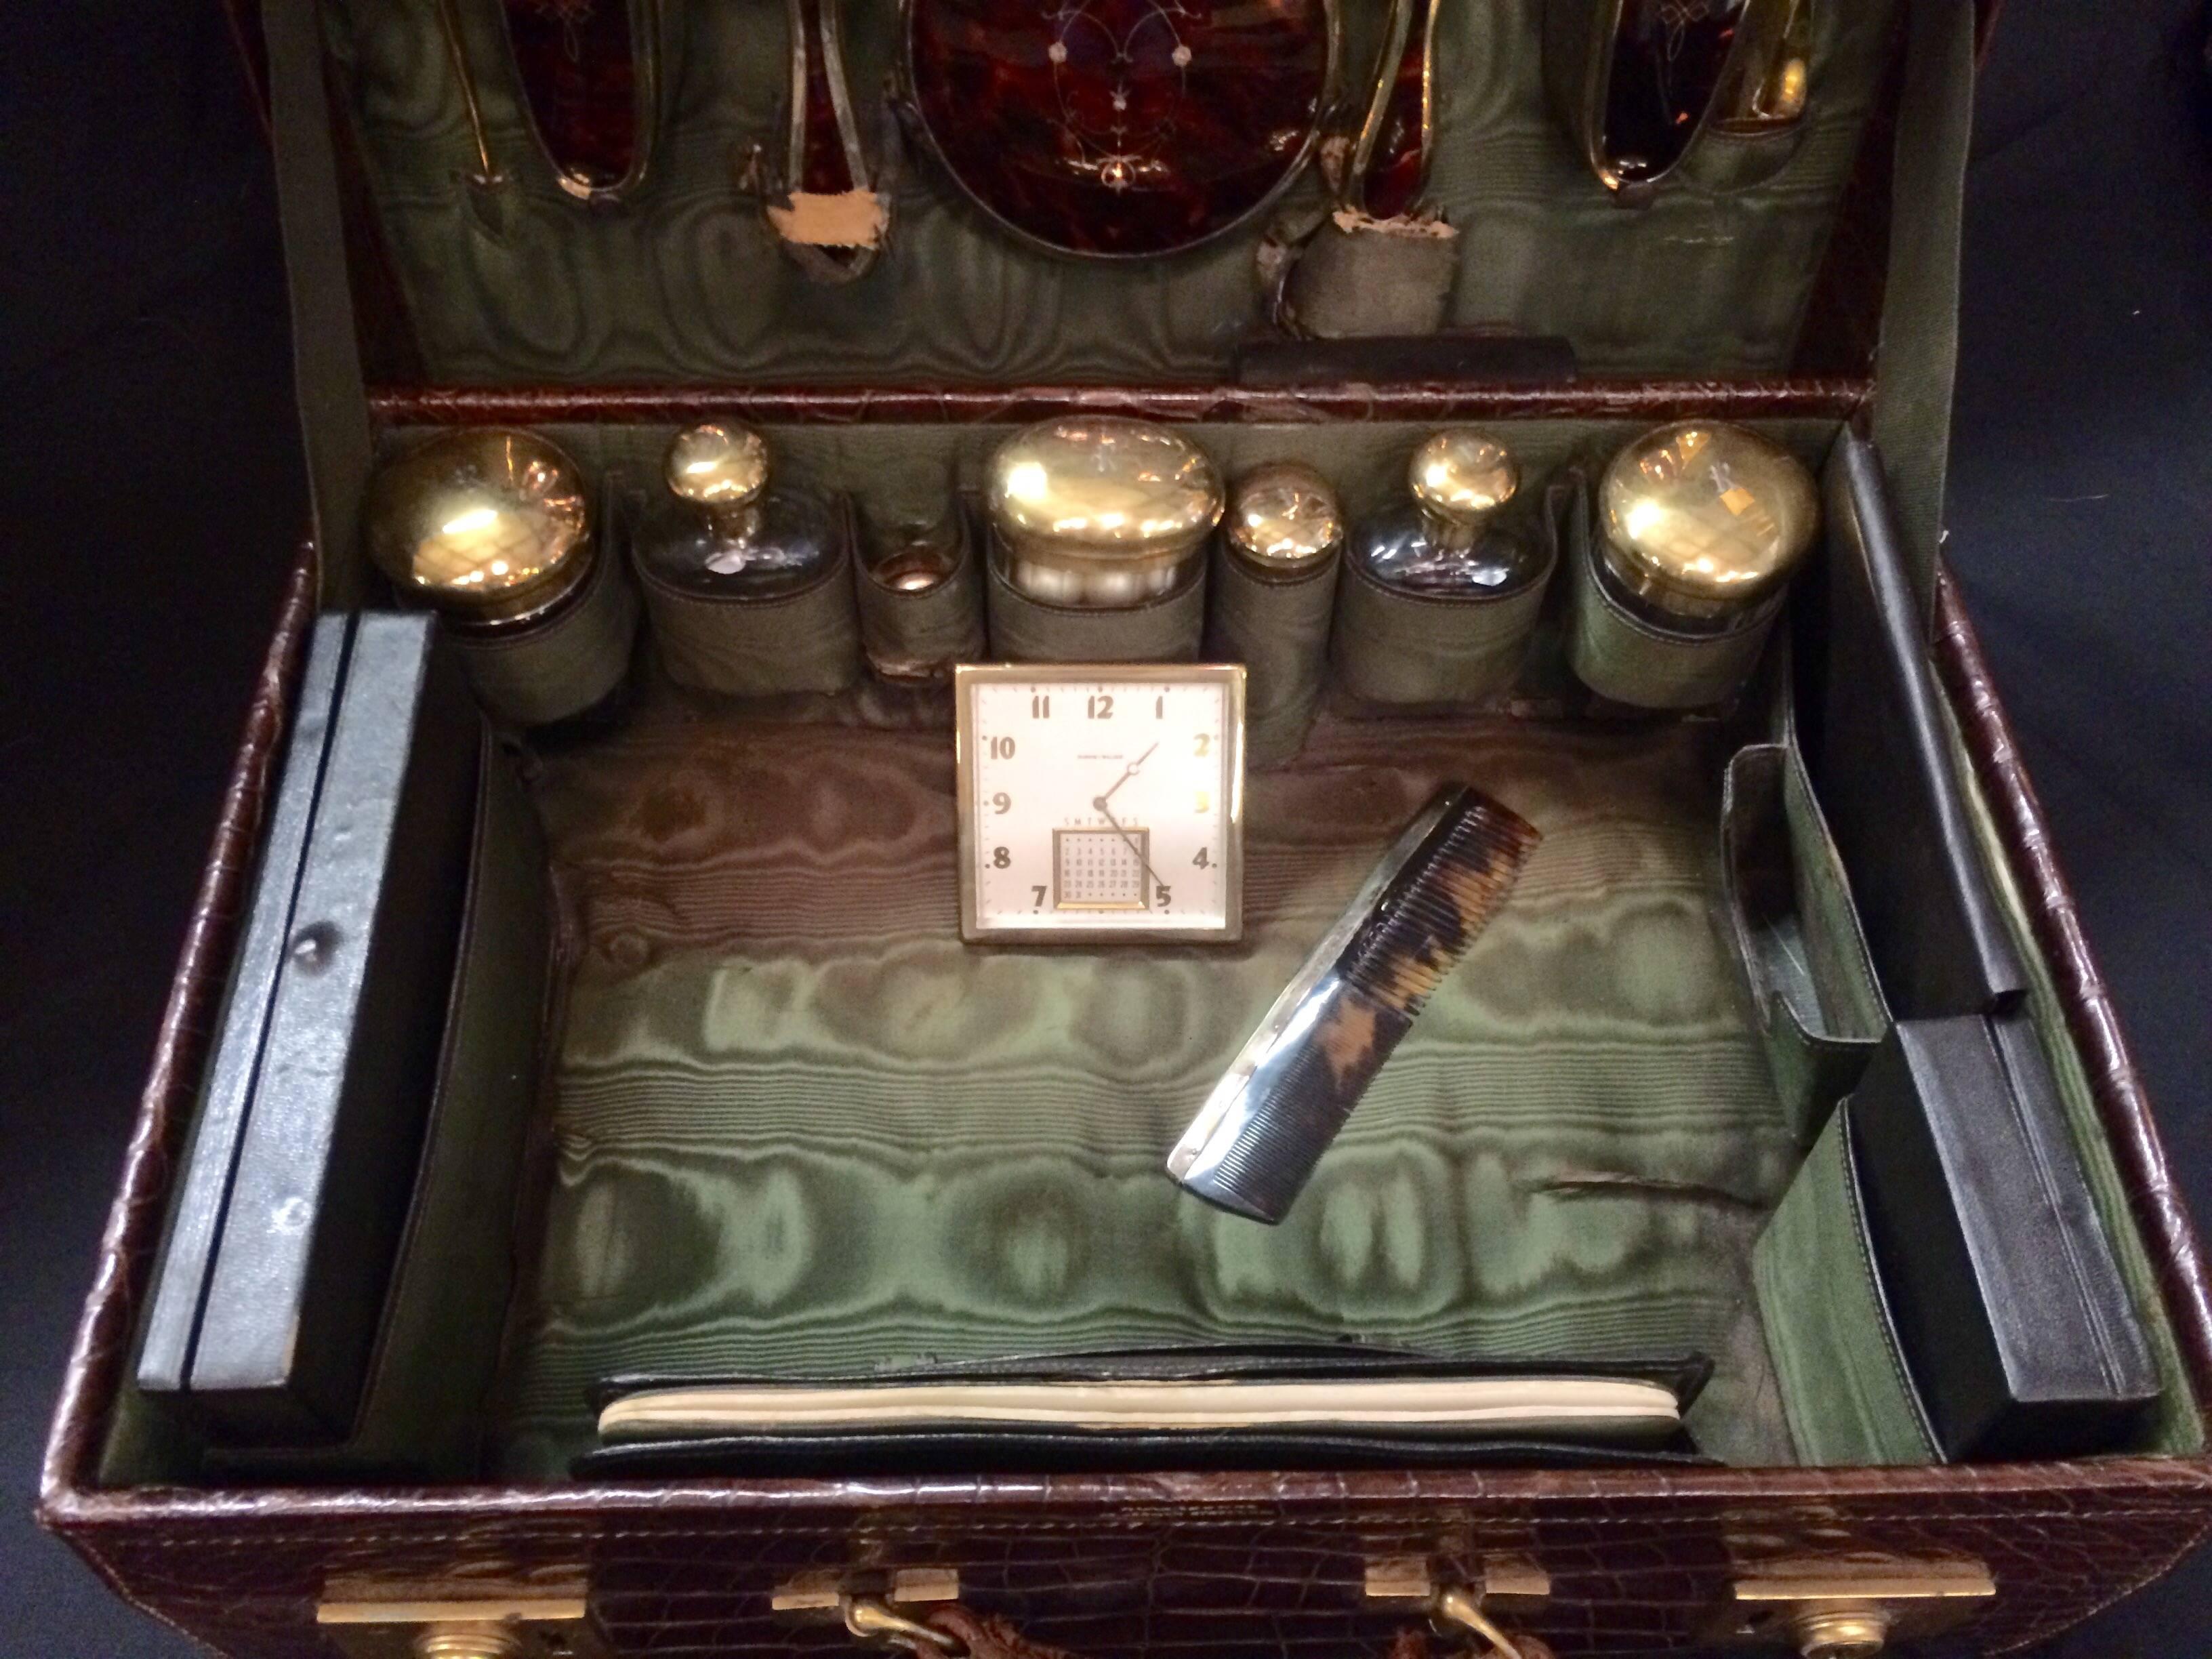 Late 19th century Art Deco men’s traveling grooming case with accessories including handblown and beveled glass bottles with gold lids engraved with initial "R. Set includes three gold inlaid brushes, one mirror, shoe horns, Phinney-Walker